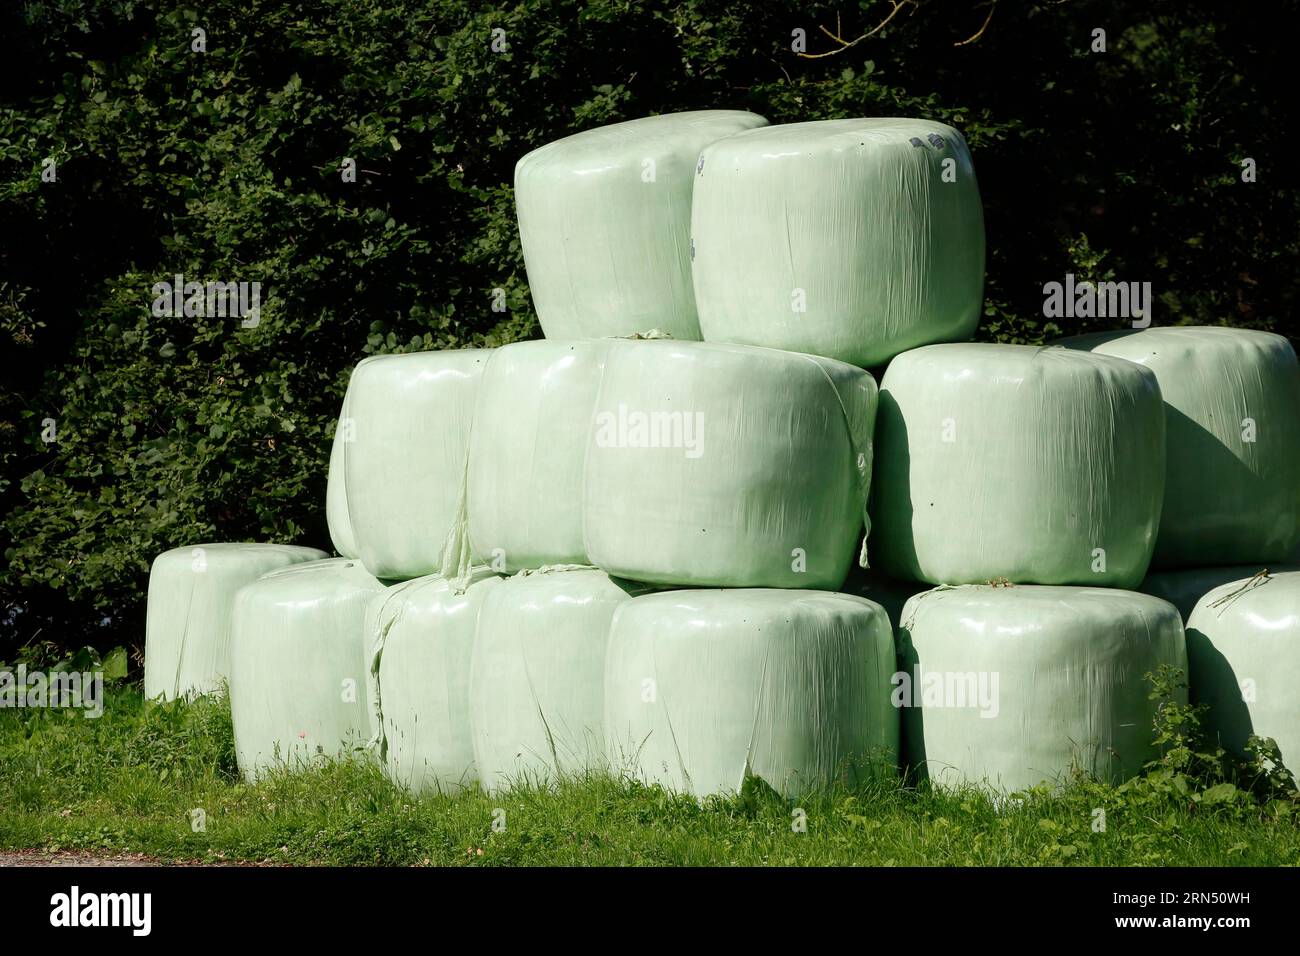 Grass silage packed with green plastic sheeting, hay, Lower Saxony, Germany Stock Photo